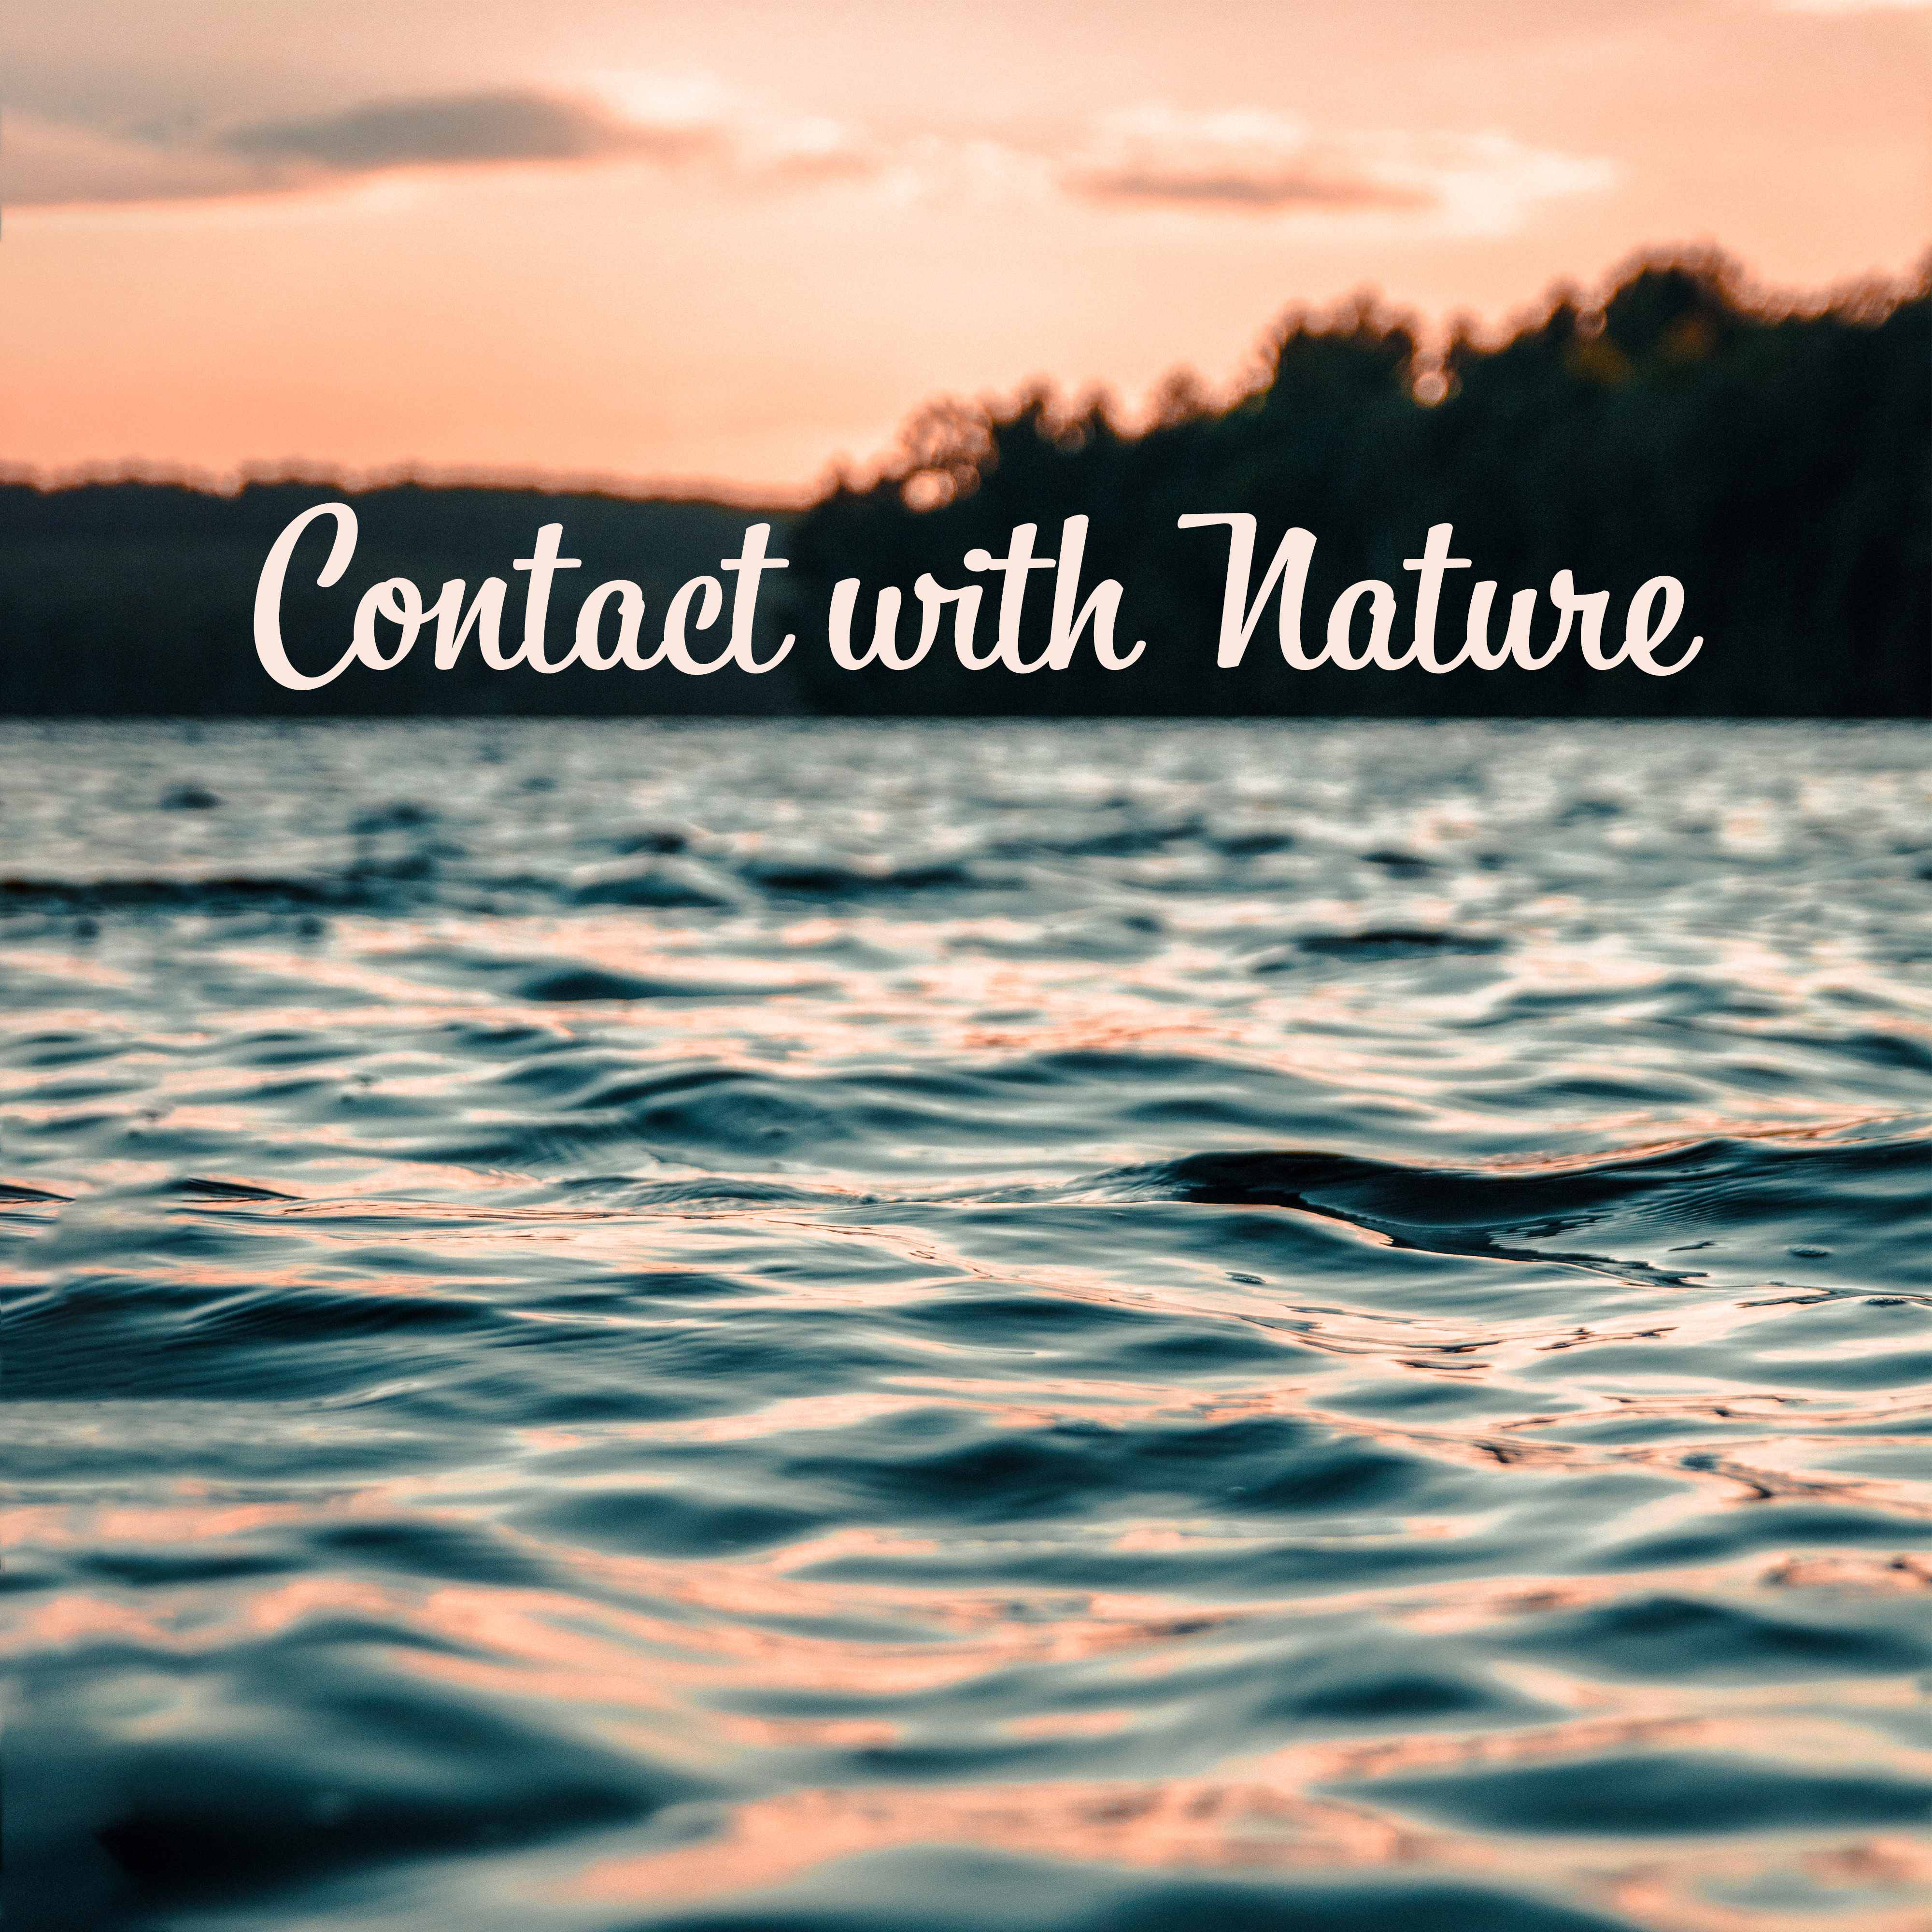 Contact with Nature